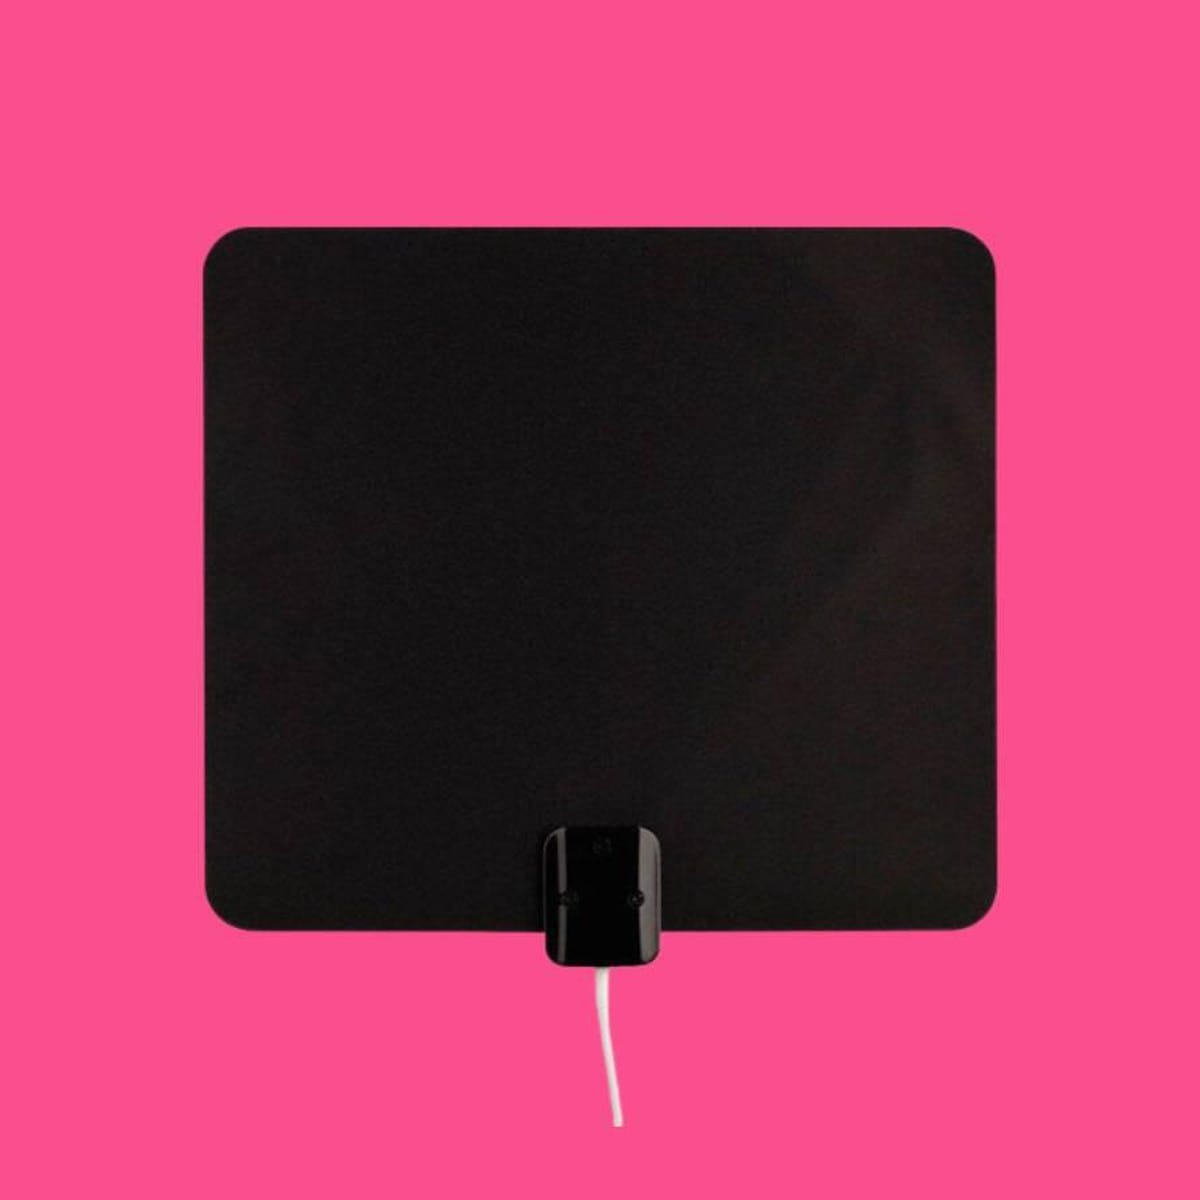 Watch TV for Free: How to Install an Over-the-Air Indoor Antenna CNET